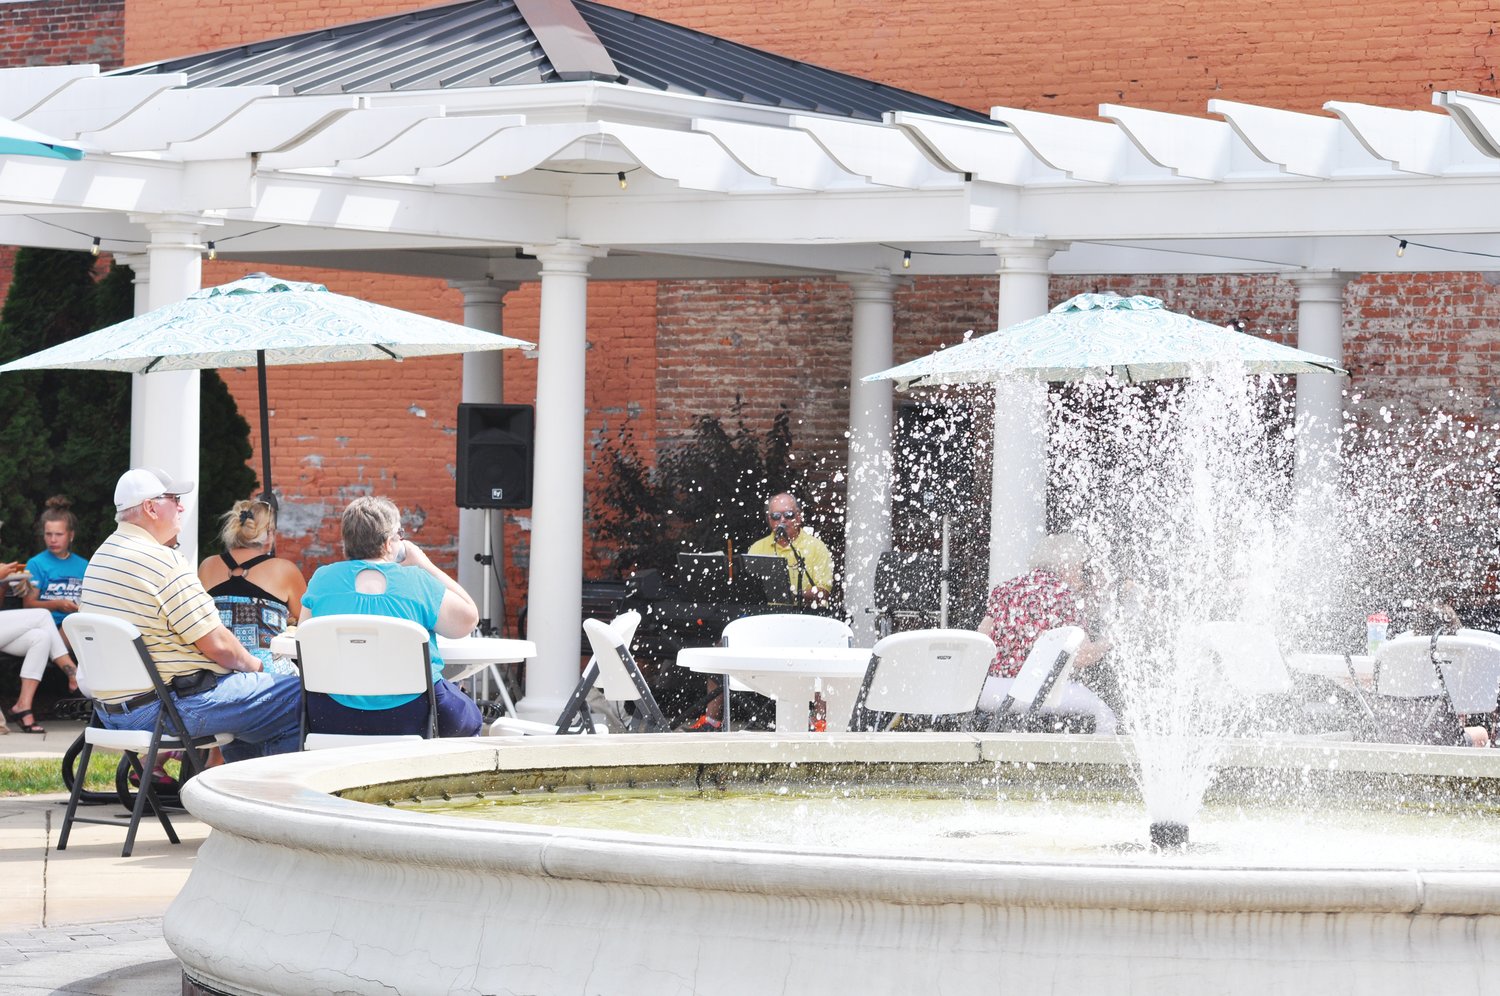 Marie Canine Plaza will again host Crawfordsville Main Street’s Lunch on the Plaza series this summer. The Crawfordsville Board of Public Works & Safety gave approval Wednesday to proceed with additional COVID-19 pandemic precautions in place.